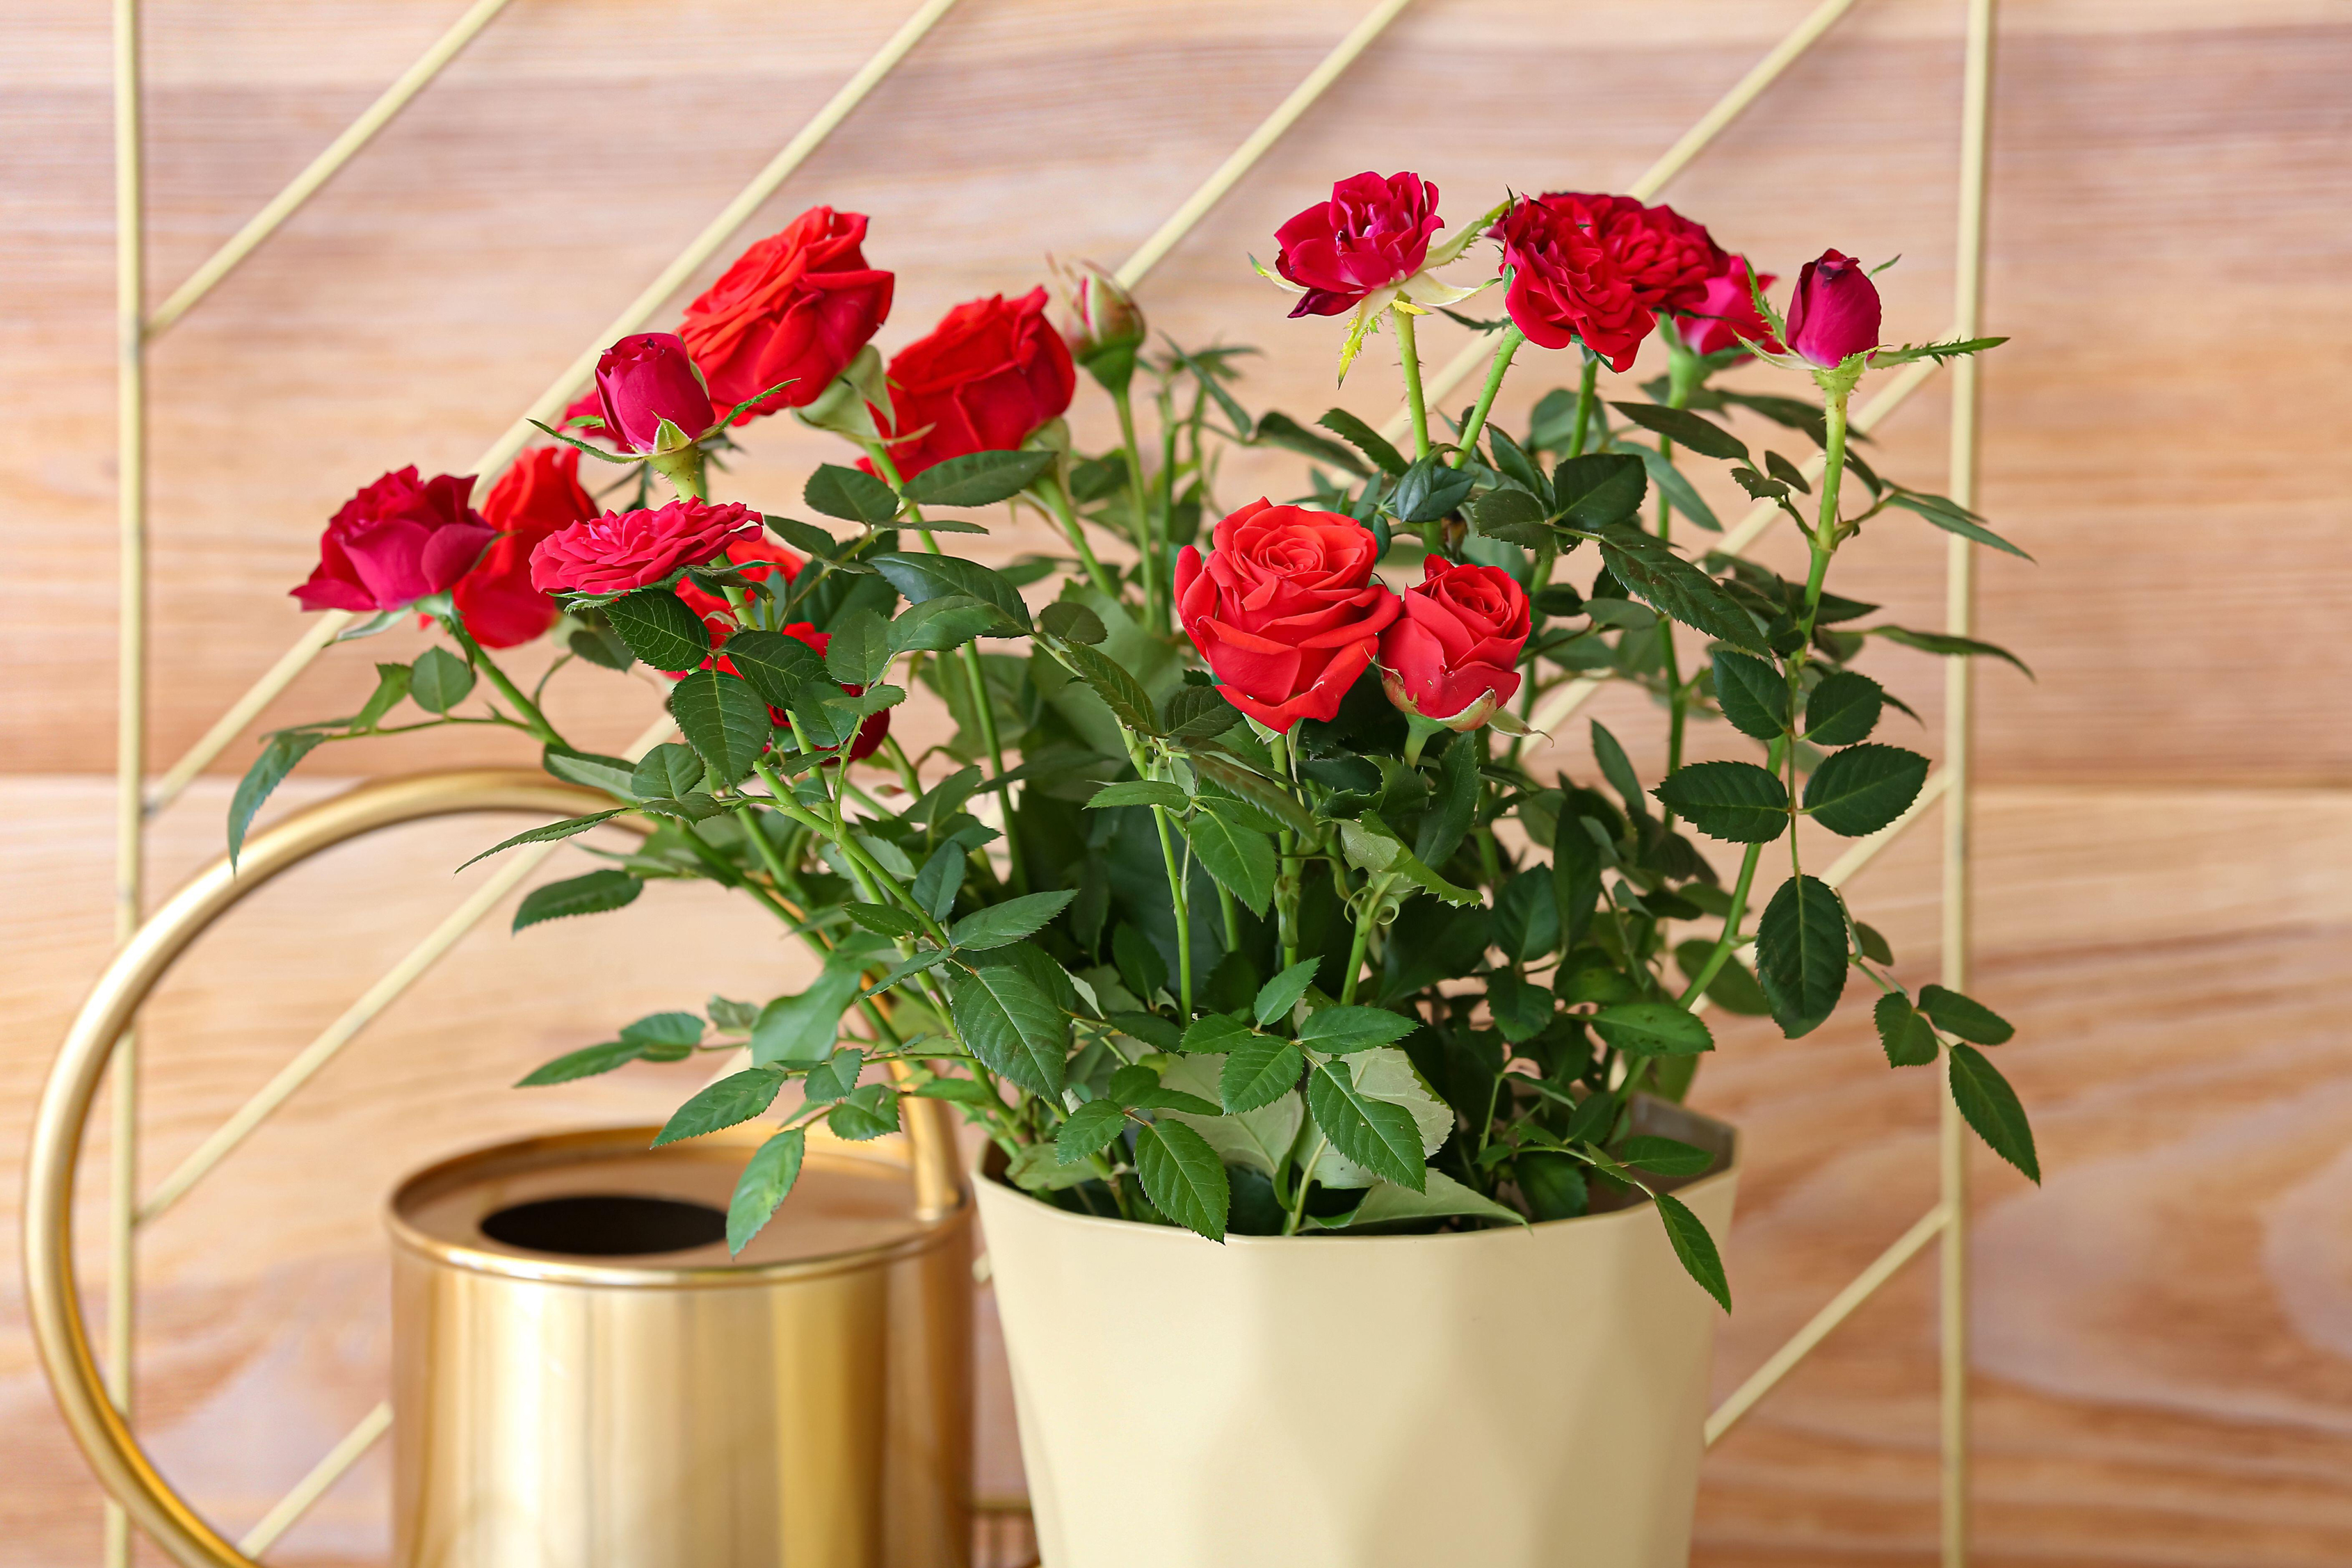 Potted rose and watering can (Alamy/PA)